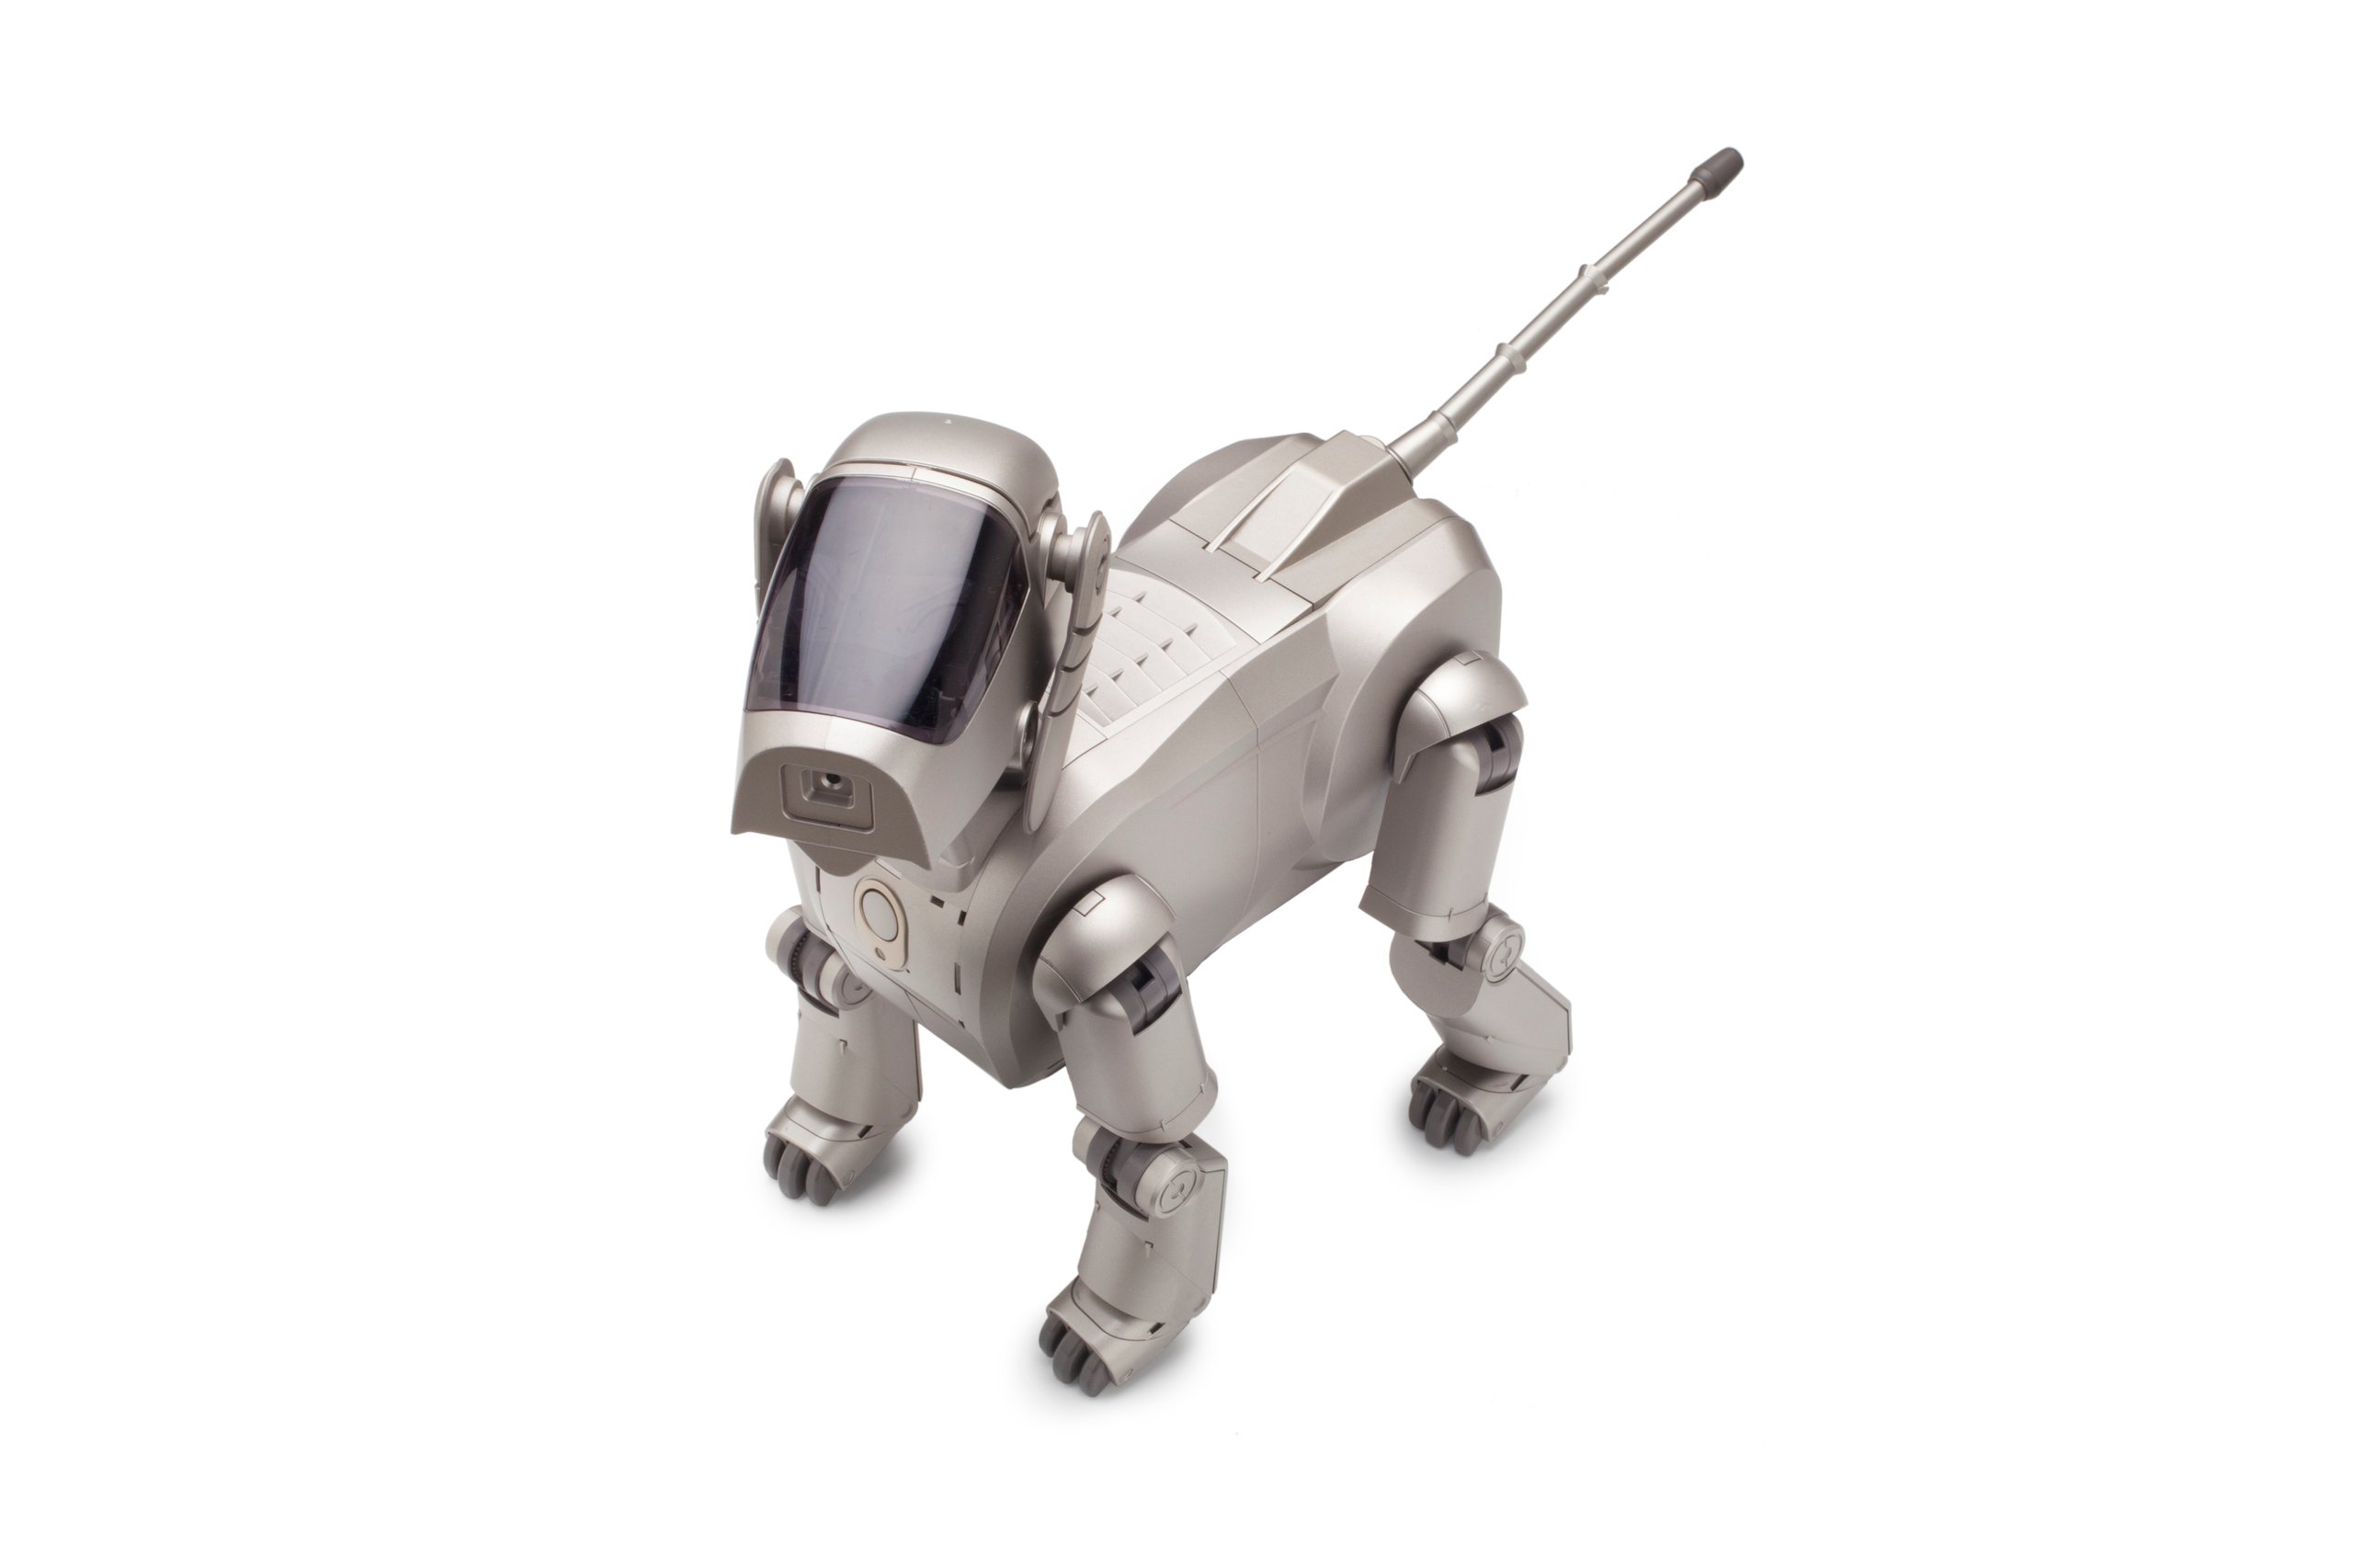 'Aibo' robot dog made by Sony